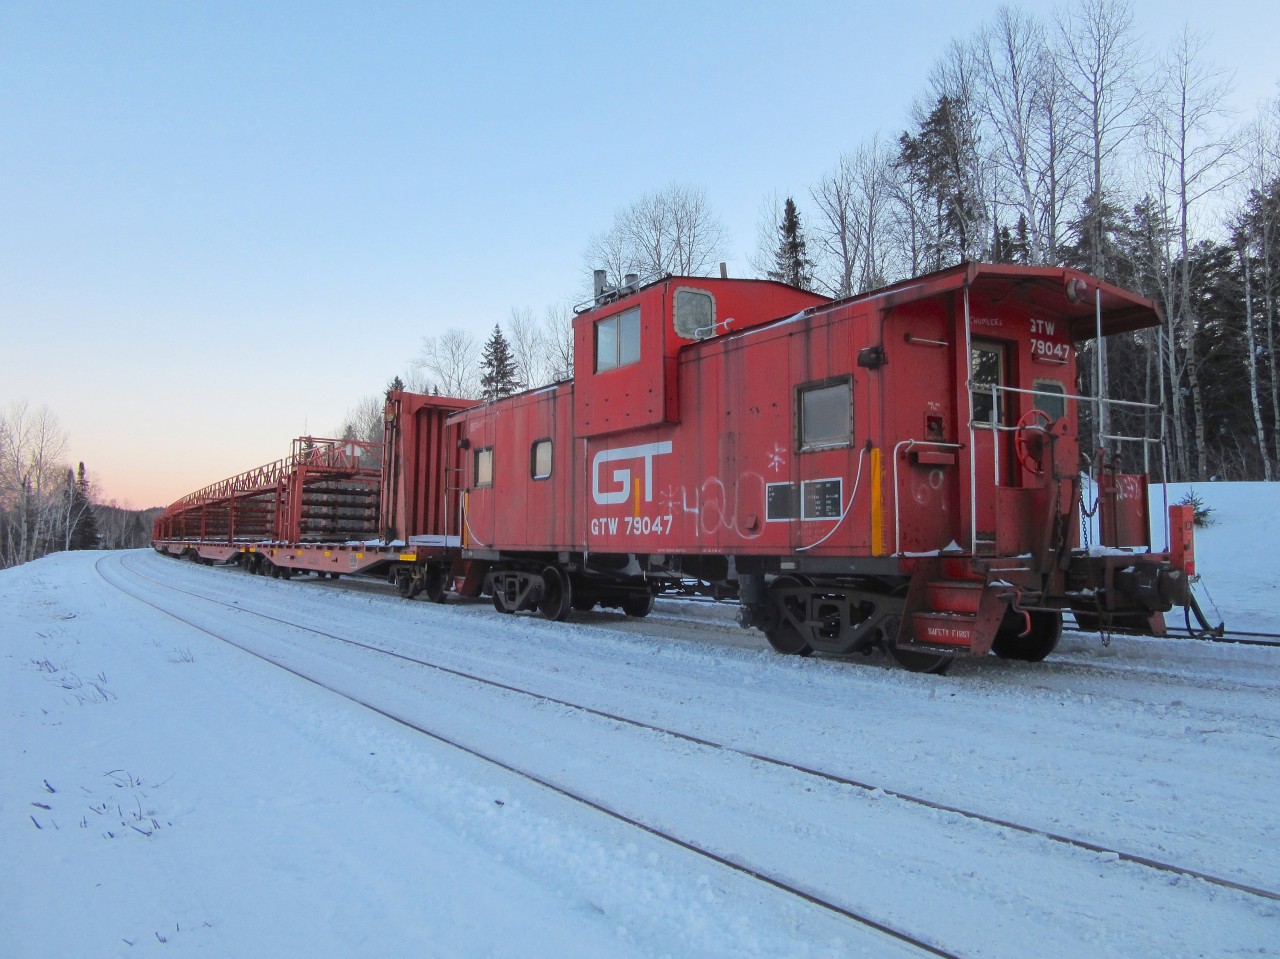 As the sun sets, temperatures approach the -35 degrees celsius mark. Work 909 is in the siding at Thorlake to let 102 by while the brakeman has a fire going in the GTW caboose.